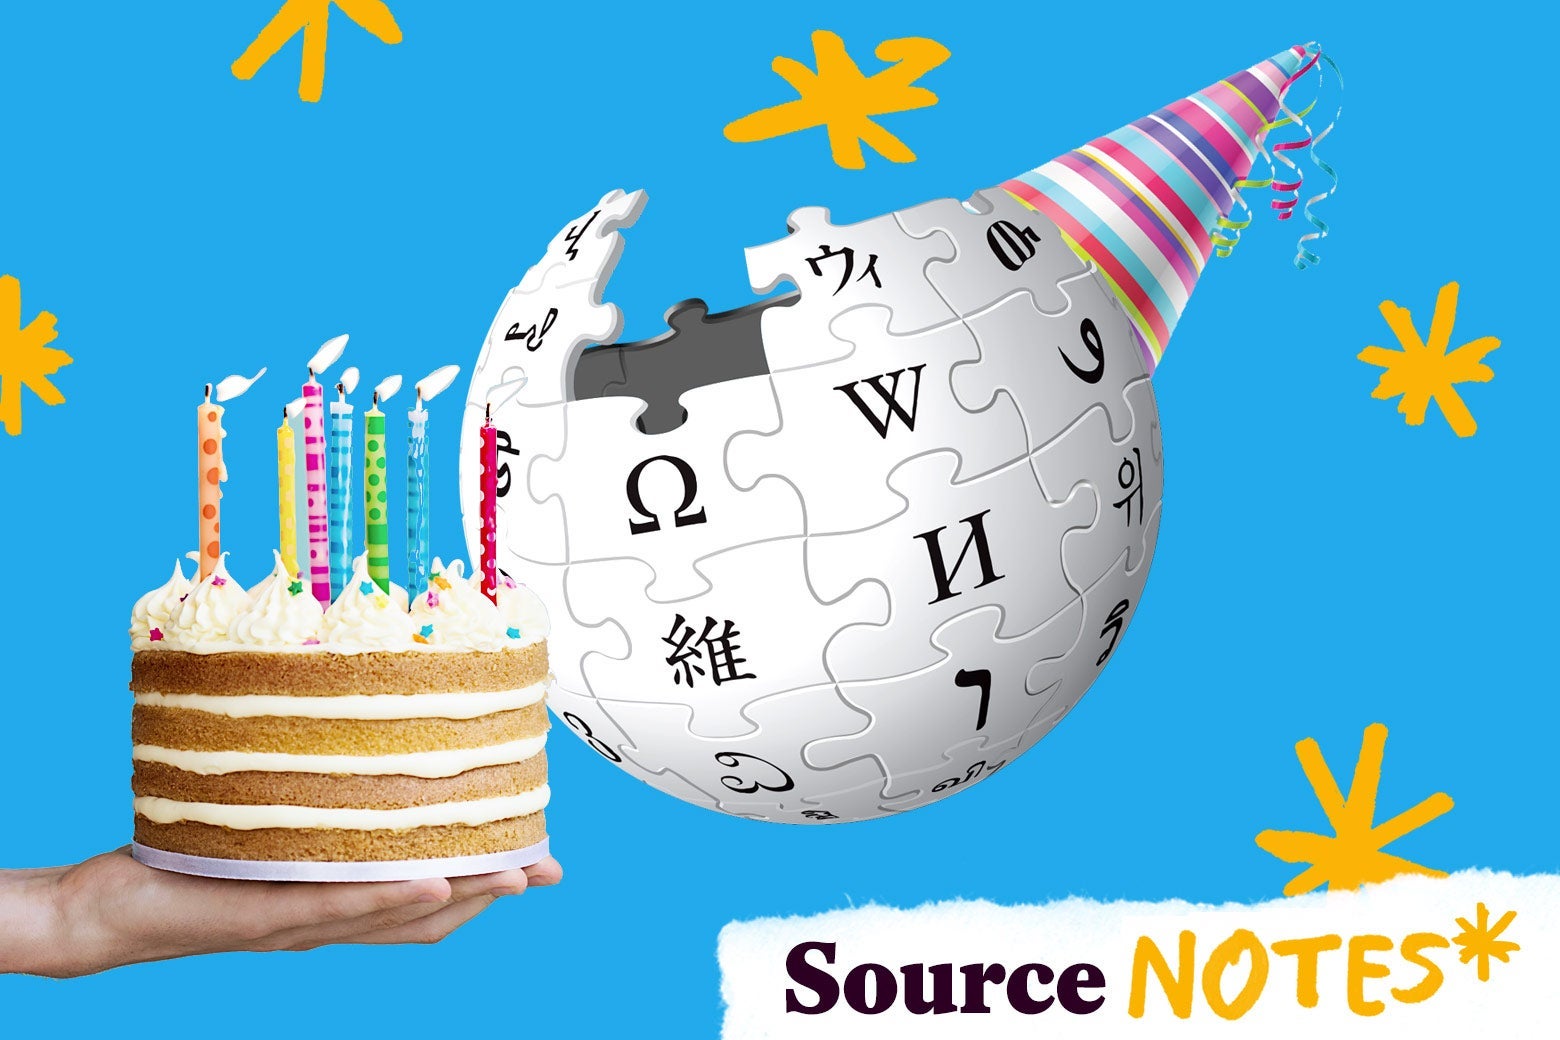 A Wikipedia globe with a birthday party hat and someone holding a birthday cake.